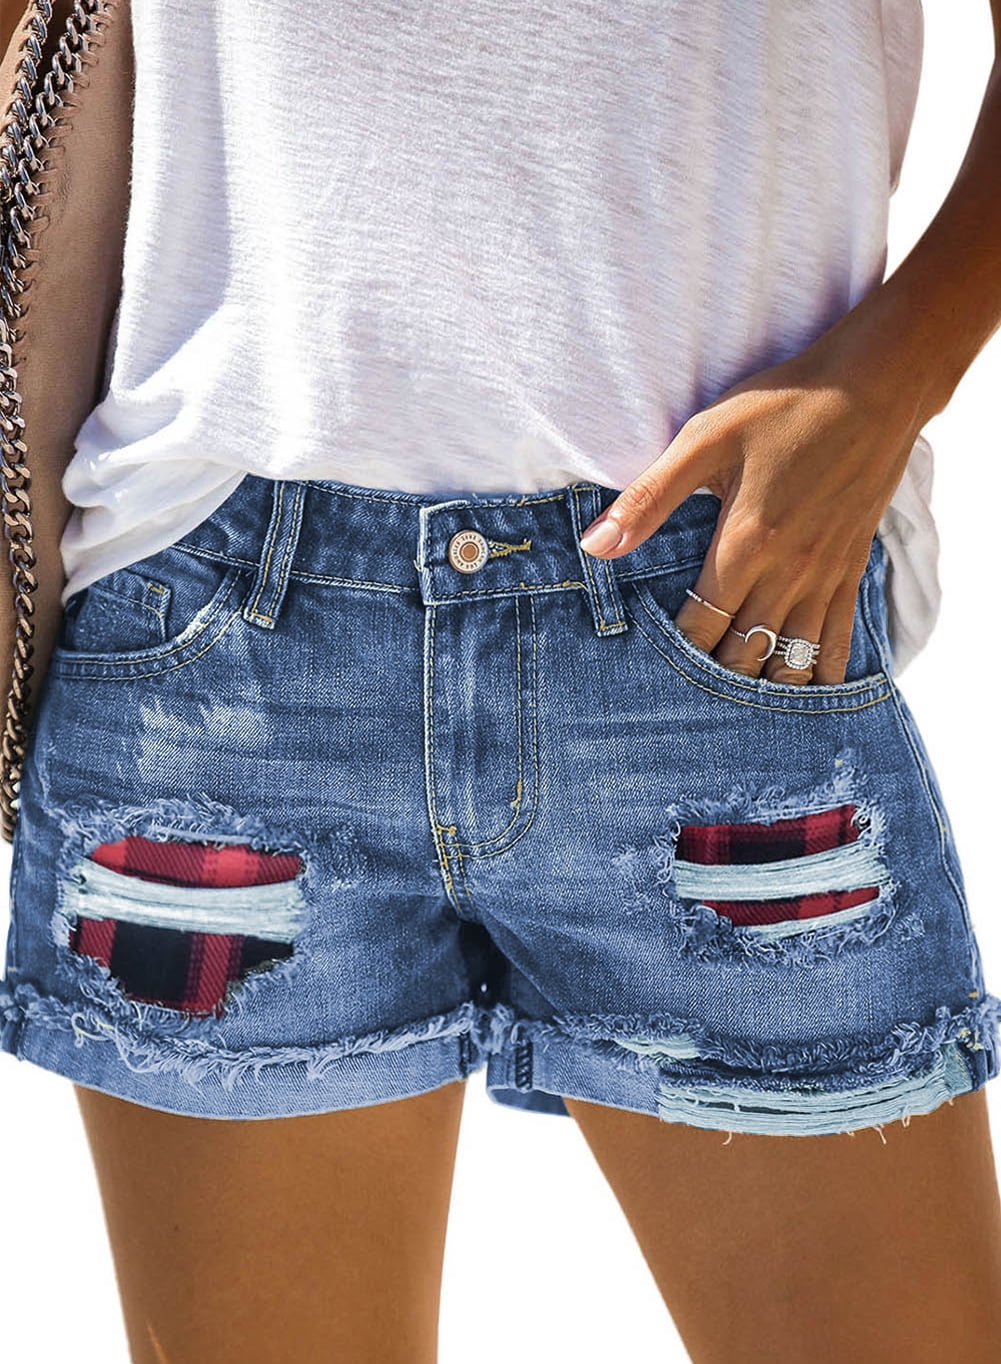 SmallYin Women's Denim Shorts Summer Stretchy Jean Mid Waist Hot Shorts Distressed Ripped Short Jeans with Pockets